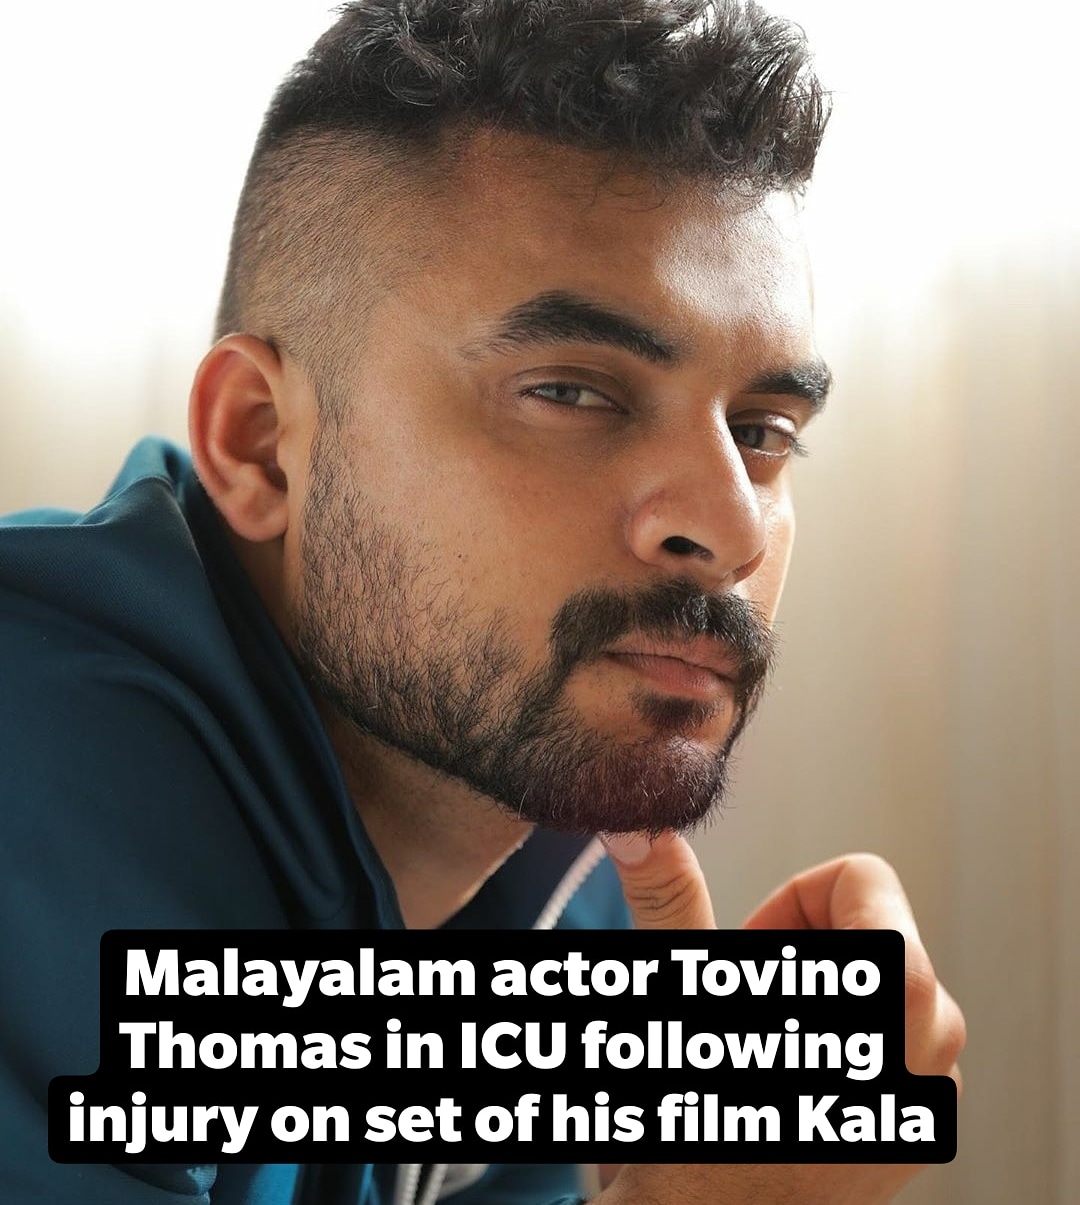 Pin by manju warrior on Tovino Thomas | Mustache styles, Male models poses,  Actor photo